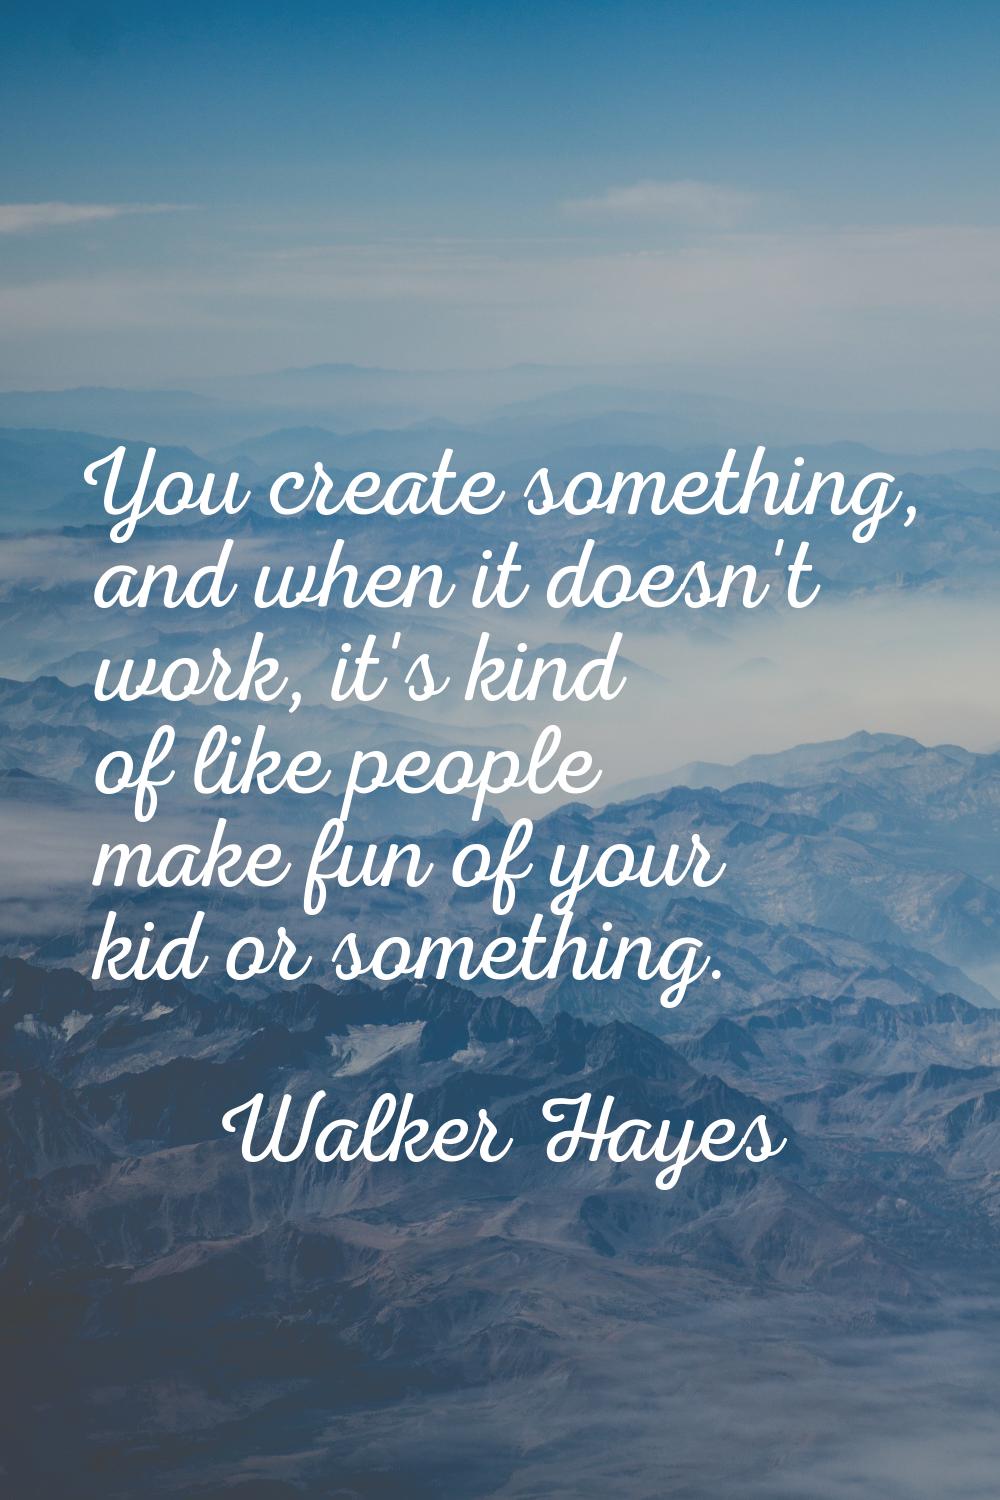 You create something, and when it doesn't work, it's kind of like people make fun of your kid or so